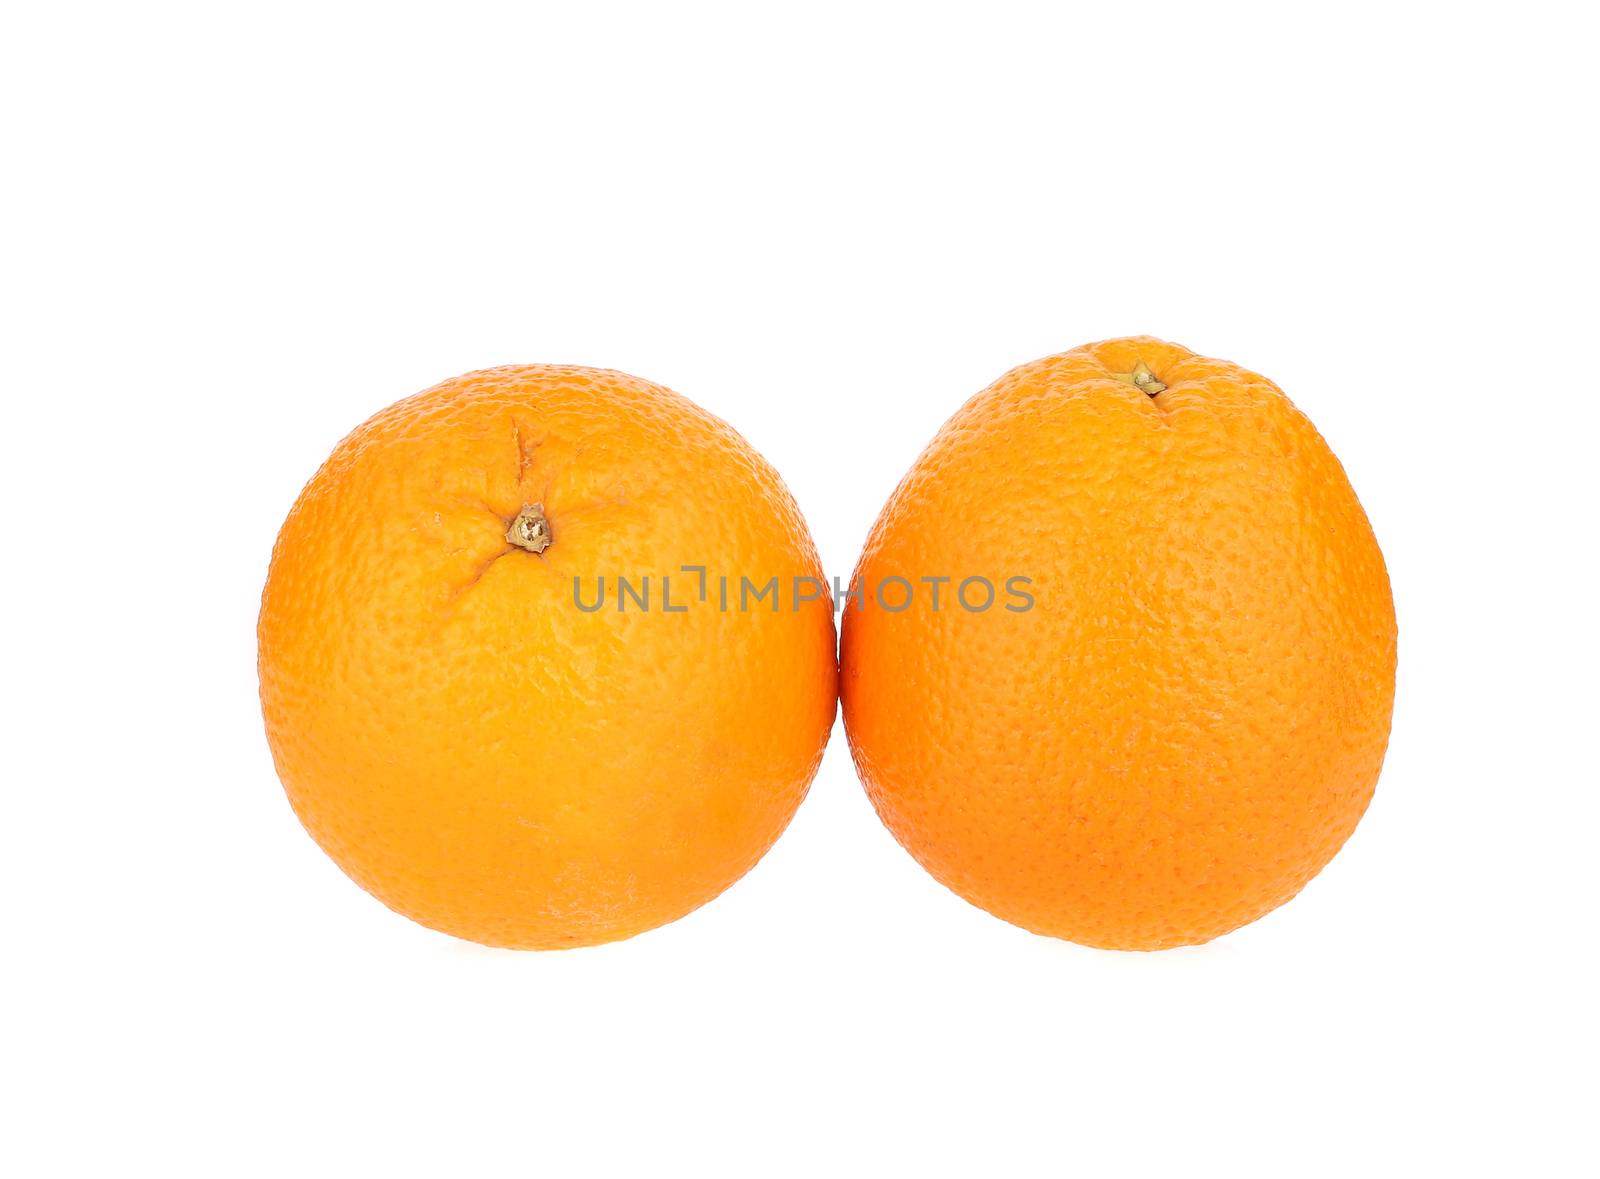 Close up of two ripe oranges. Isolated on a white background.